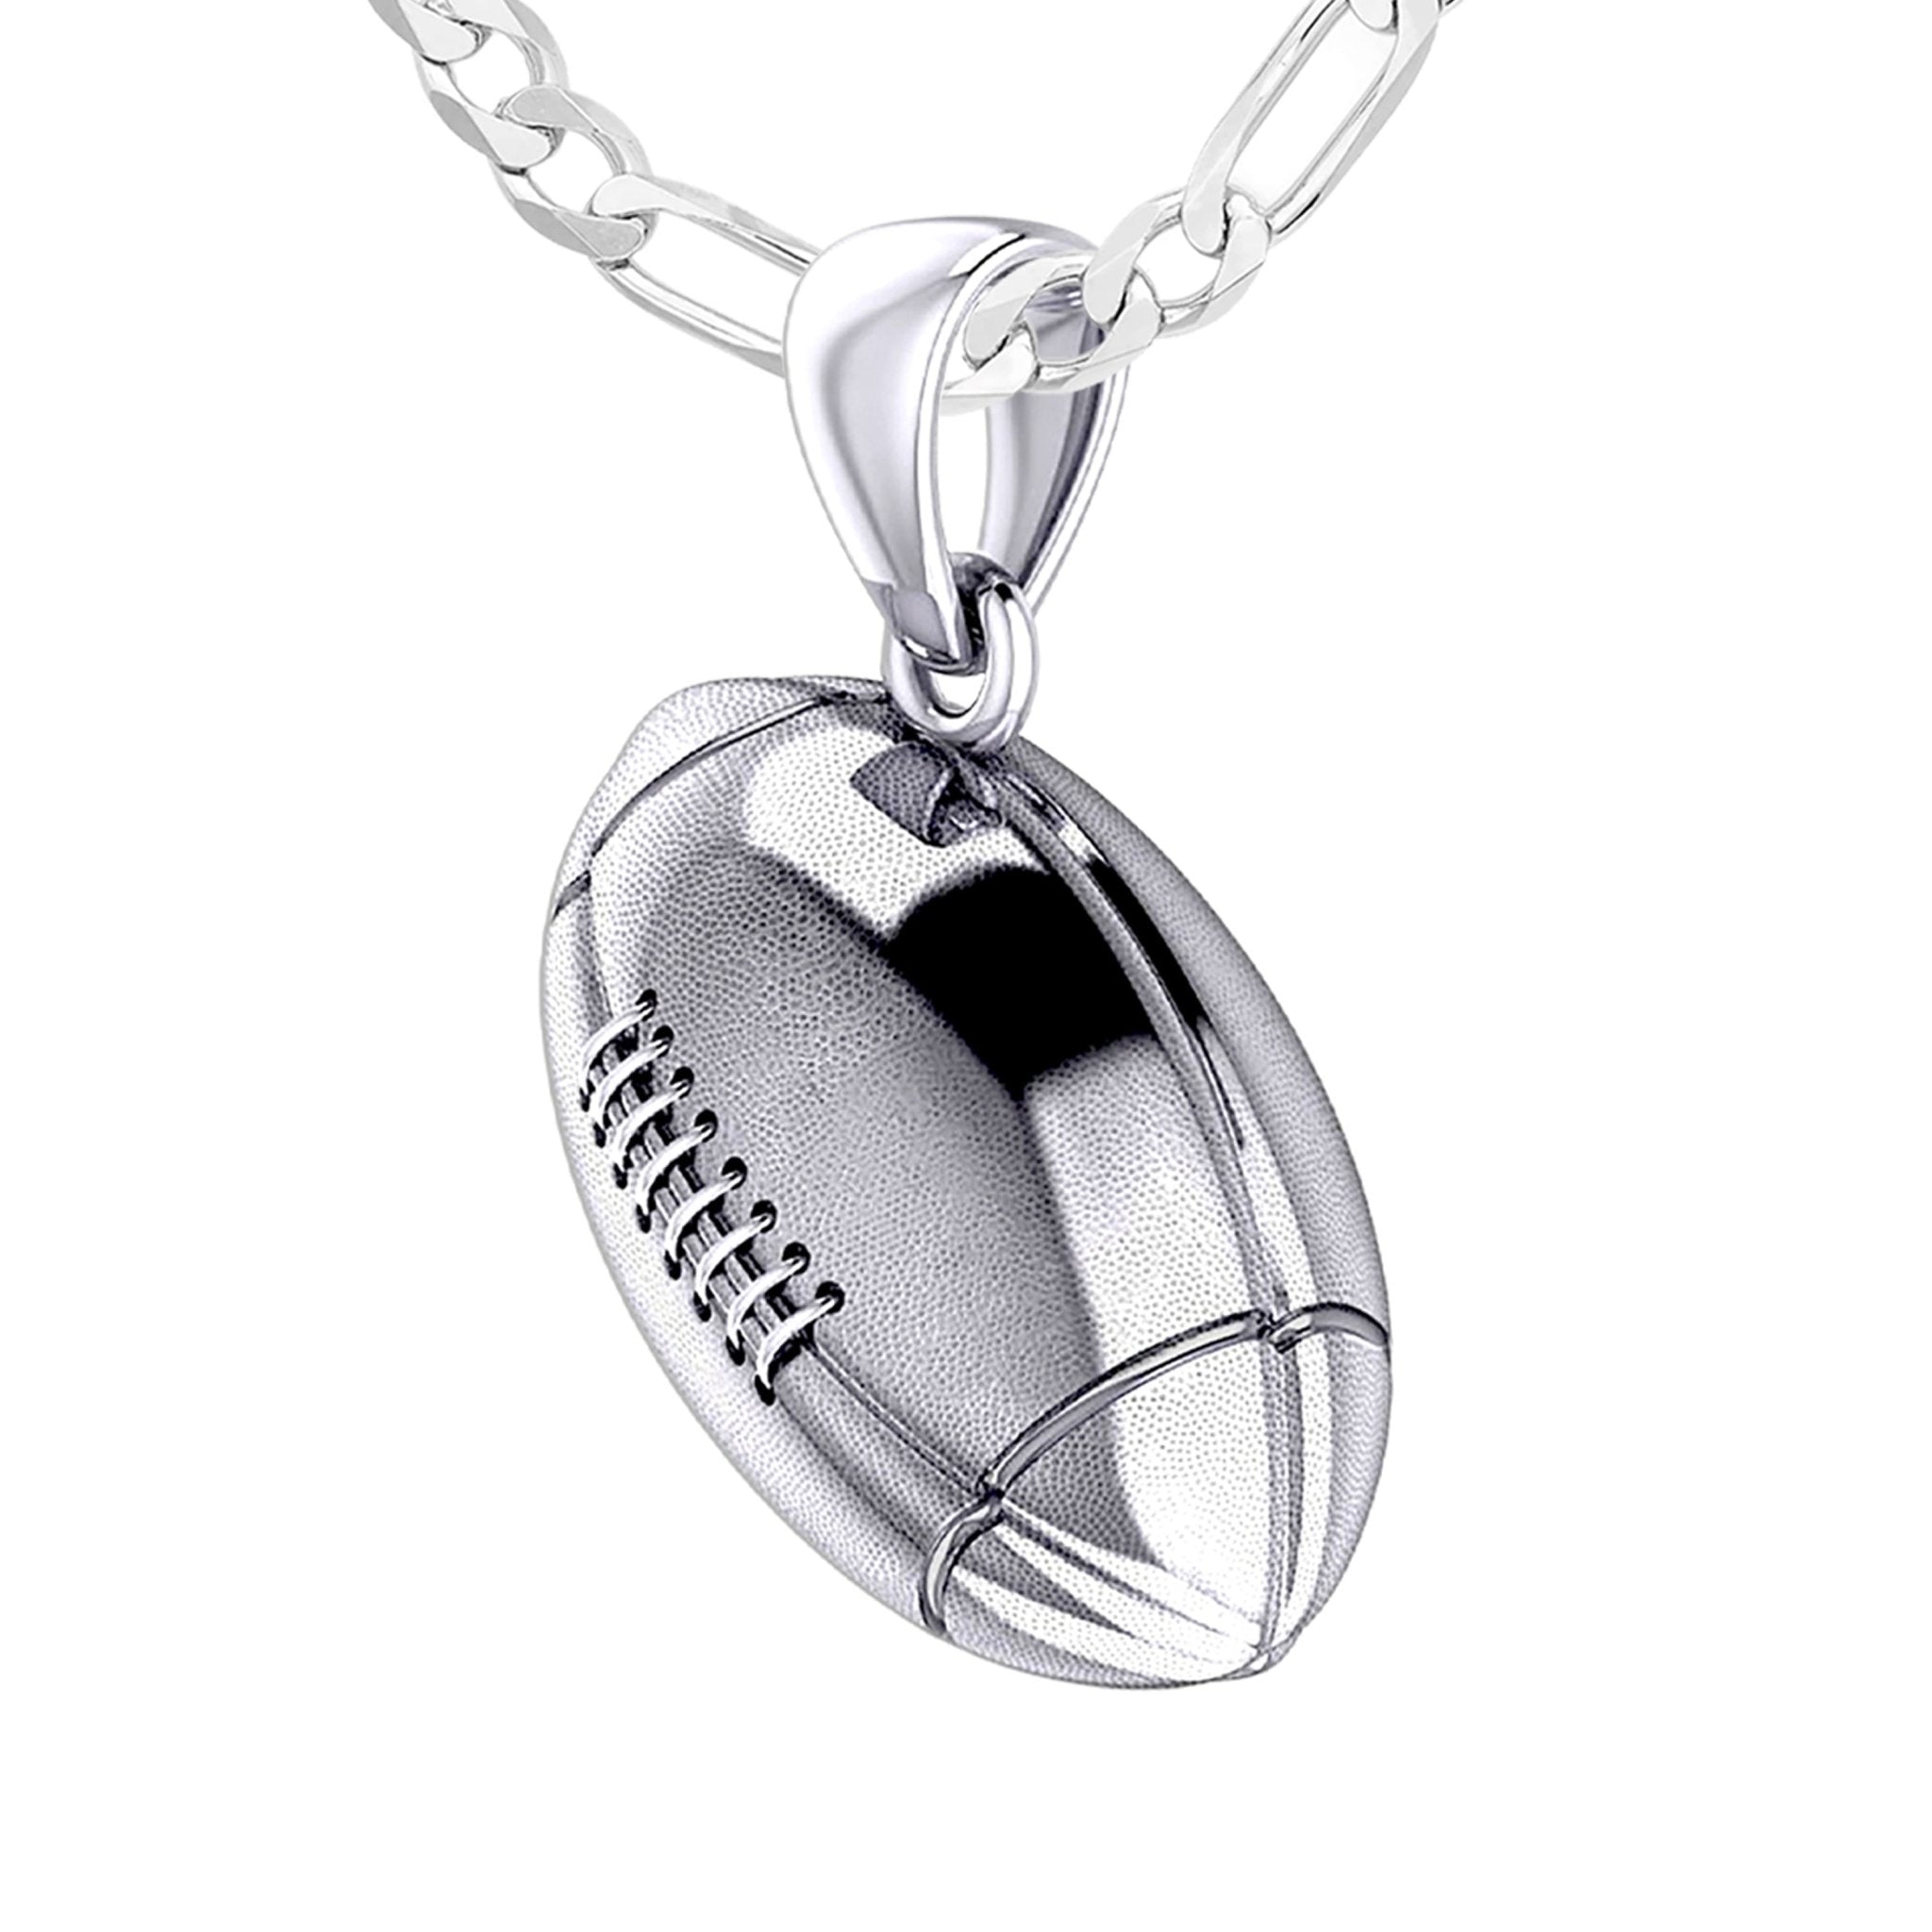 Sterling Silver U. of Louisville Football Pendant Necklace